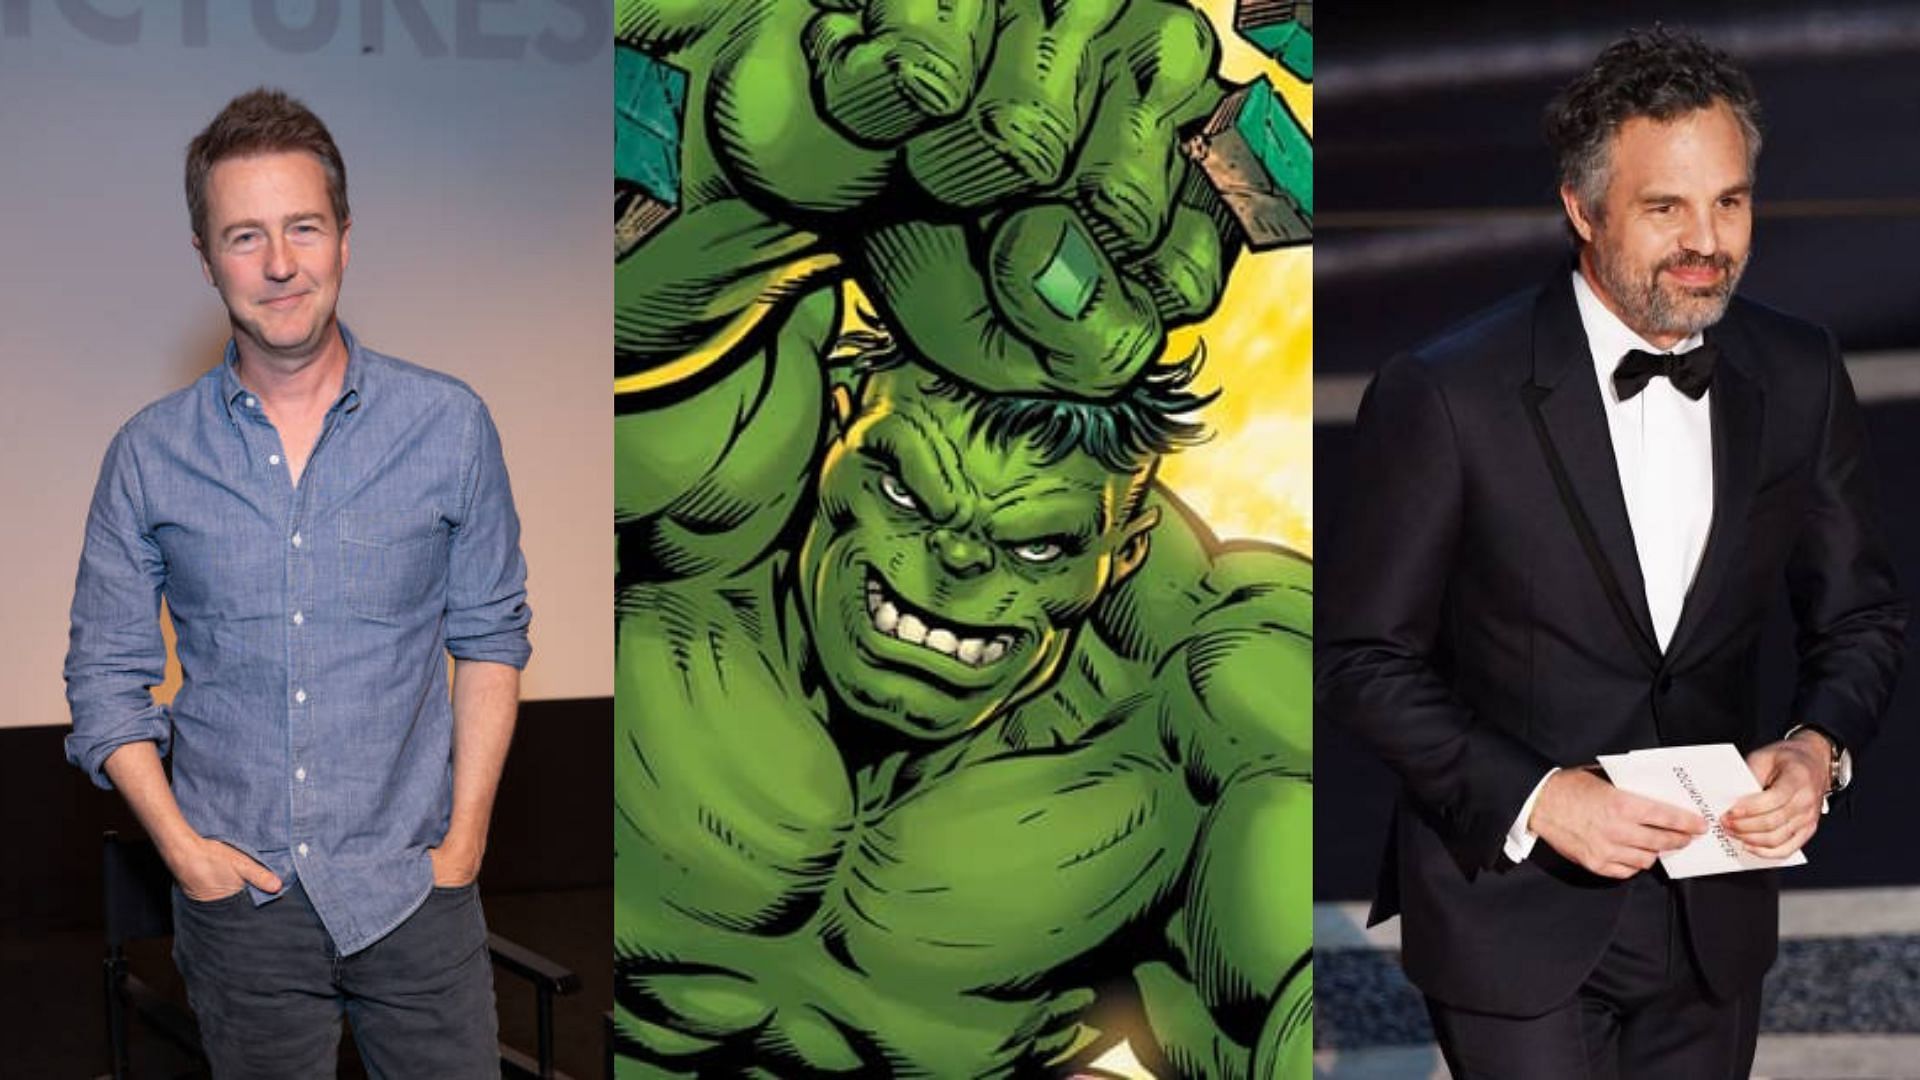 Edward Norton was replaced as the Hulk by Mark Ruffalo (Image via Getty and Marvel)